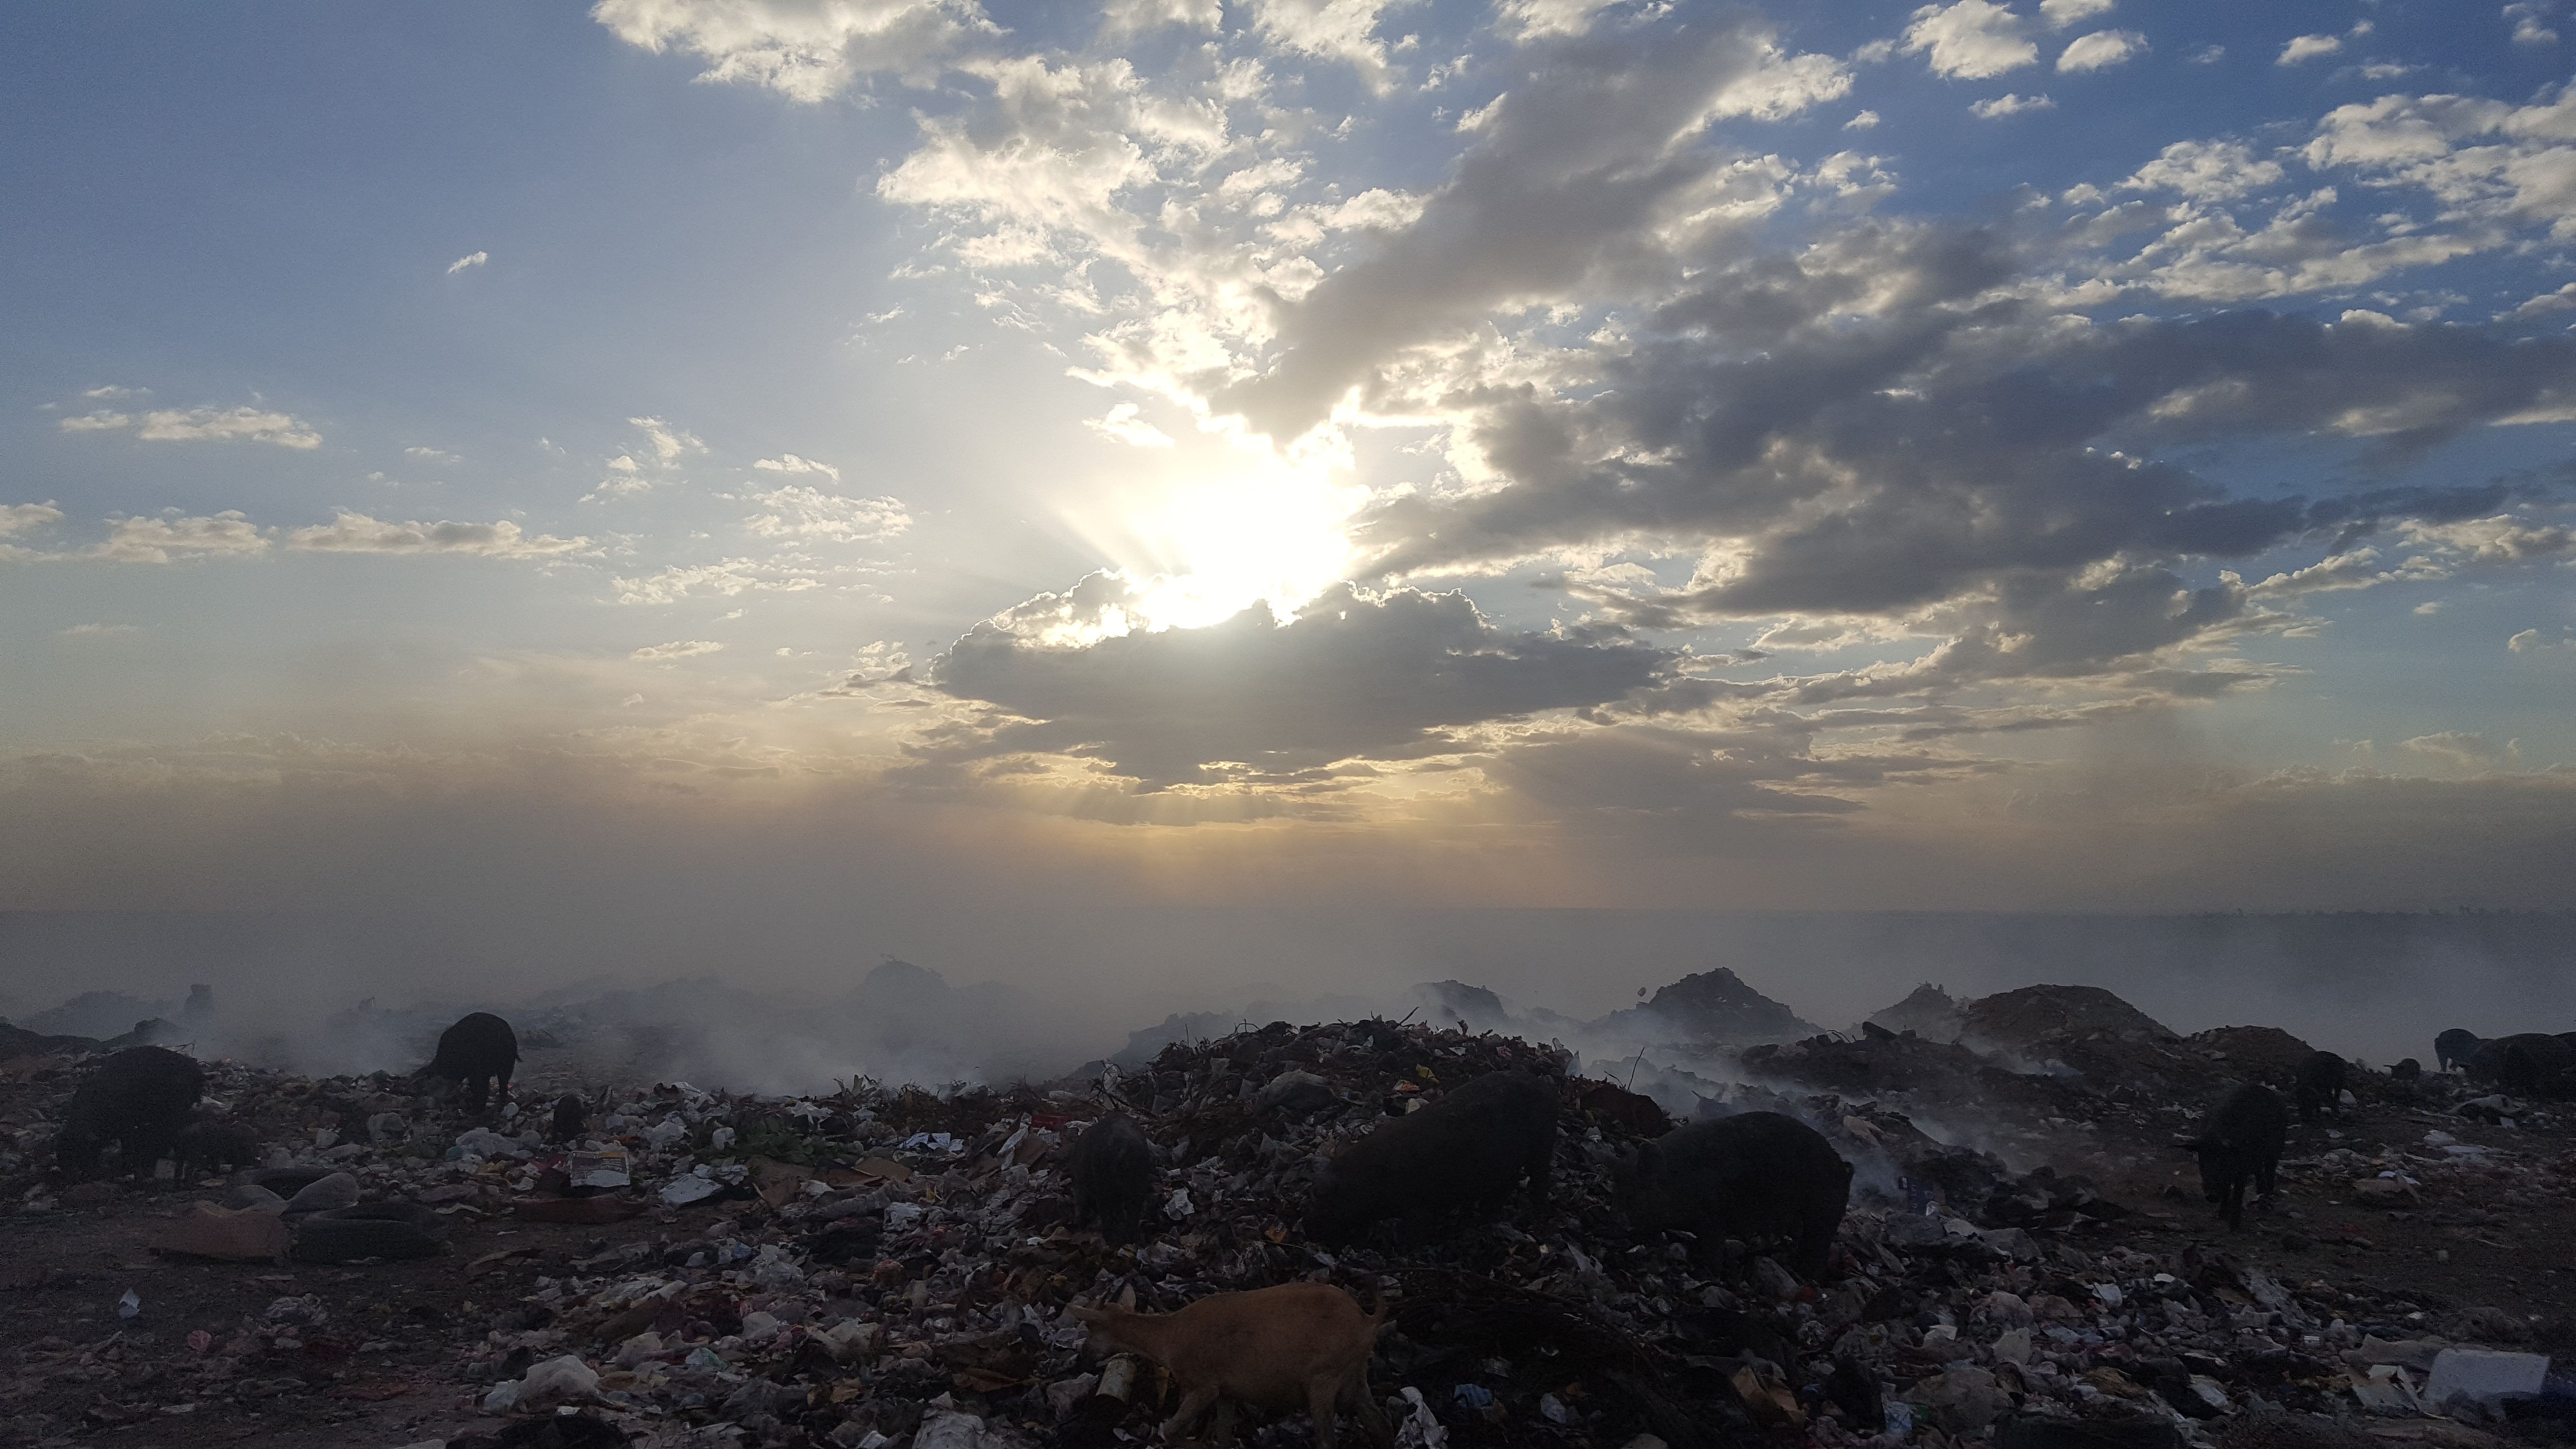 The garbage dump at Truitter, outside Port-au-Prince, burns day and night. After the 2010 earthquake in Haiti, raw sewage was also dumped there until a new site was built. Image by Rebecca Hersher. Haiti, 2017.